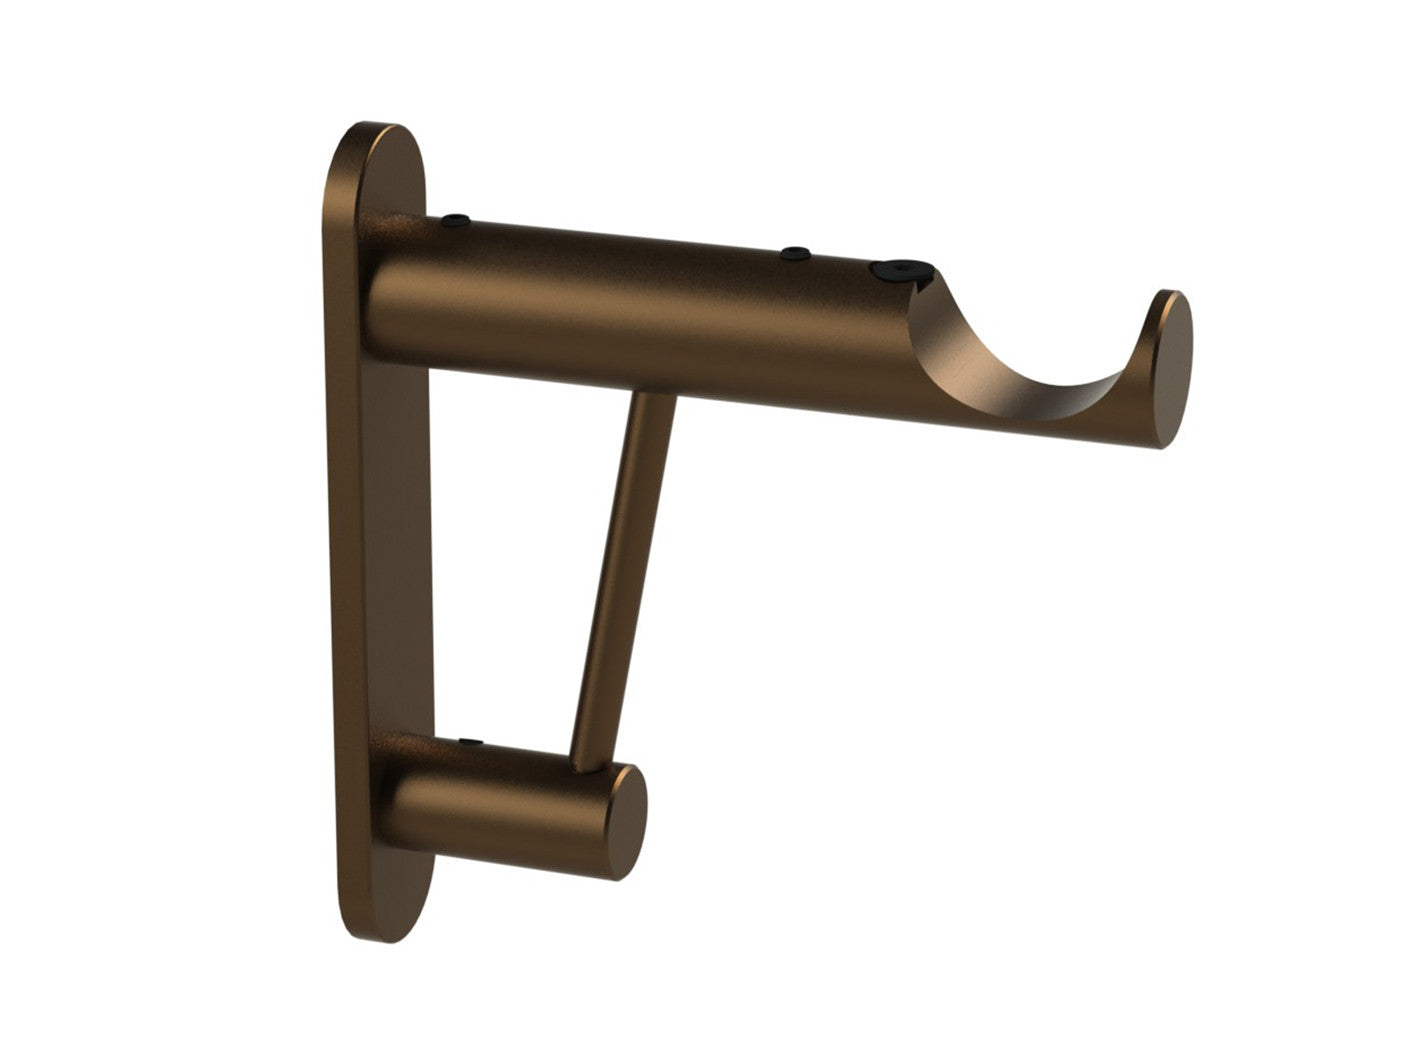 Architrave bracket for 30mm diameter curtain poles in stainless steel